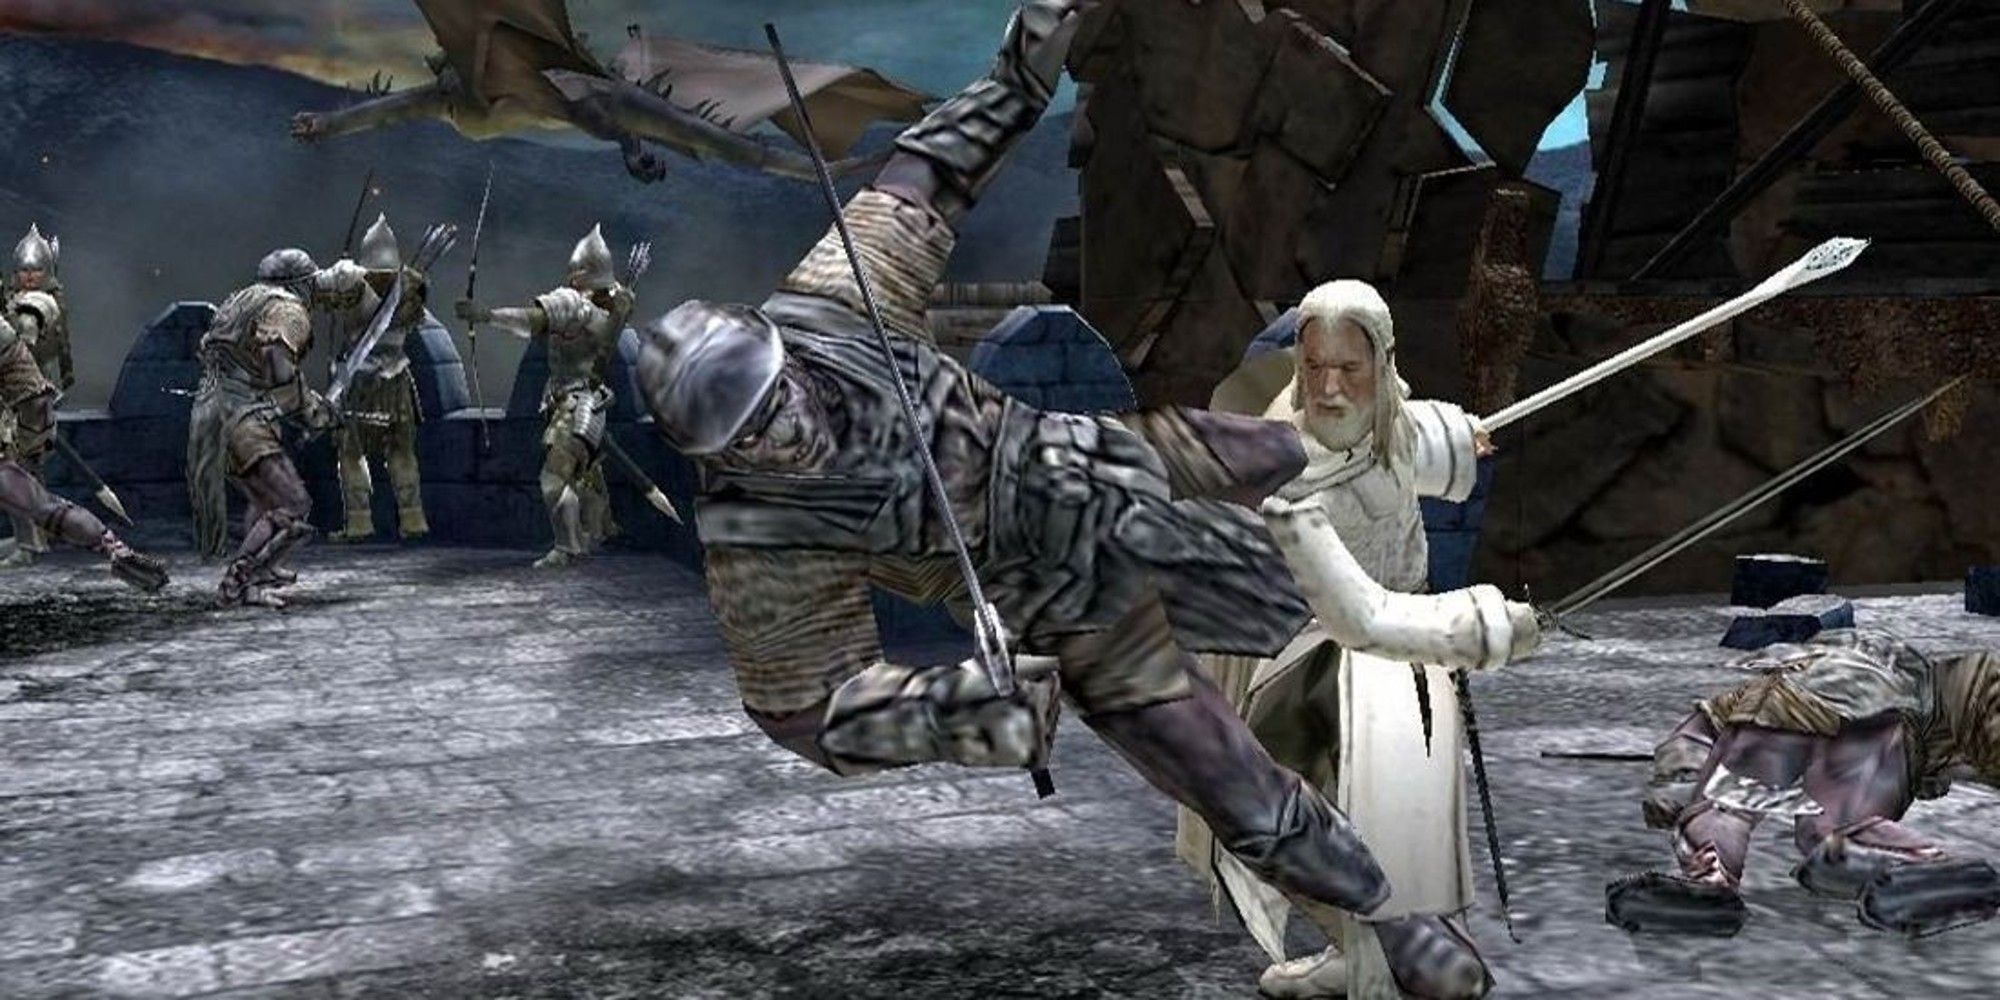 Gandalf slashes an orc with his sword in The Lord of the Rings The Return of the King Game